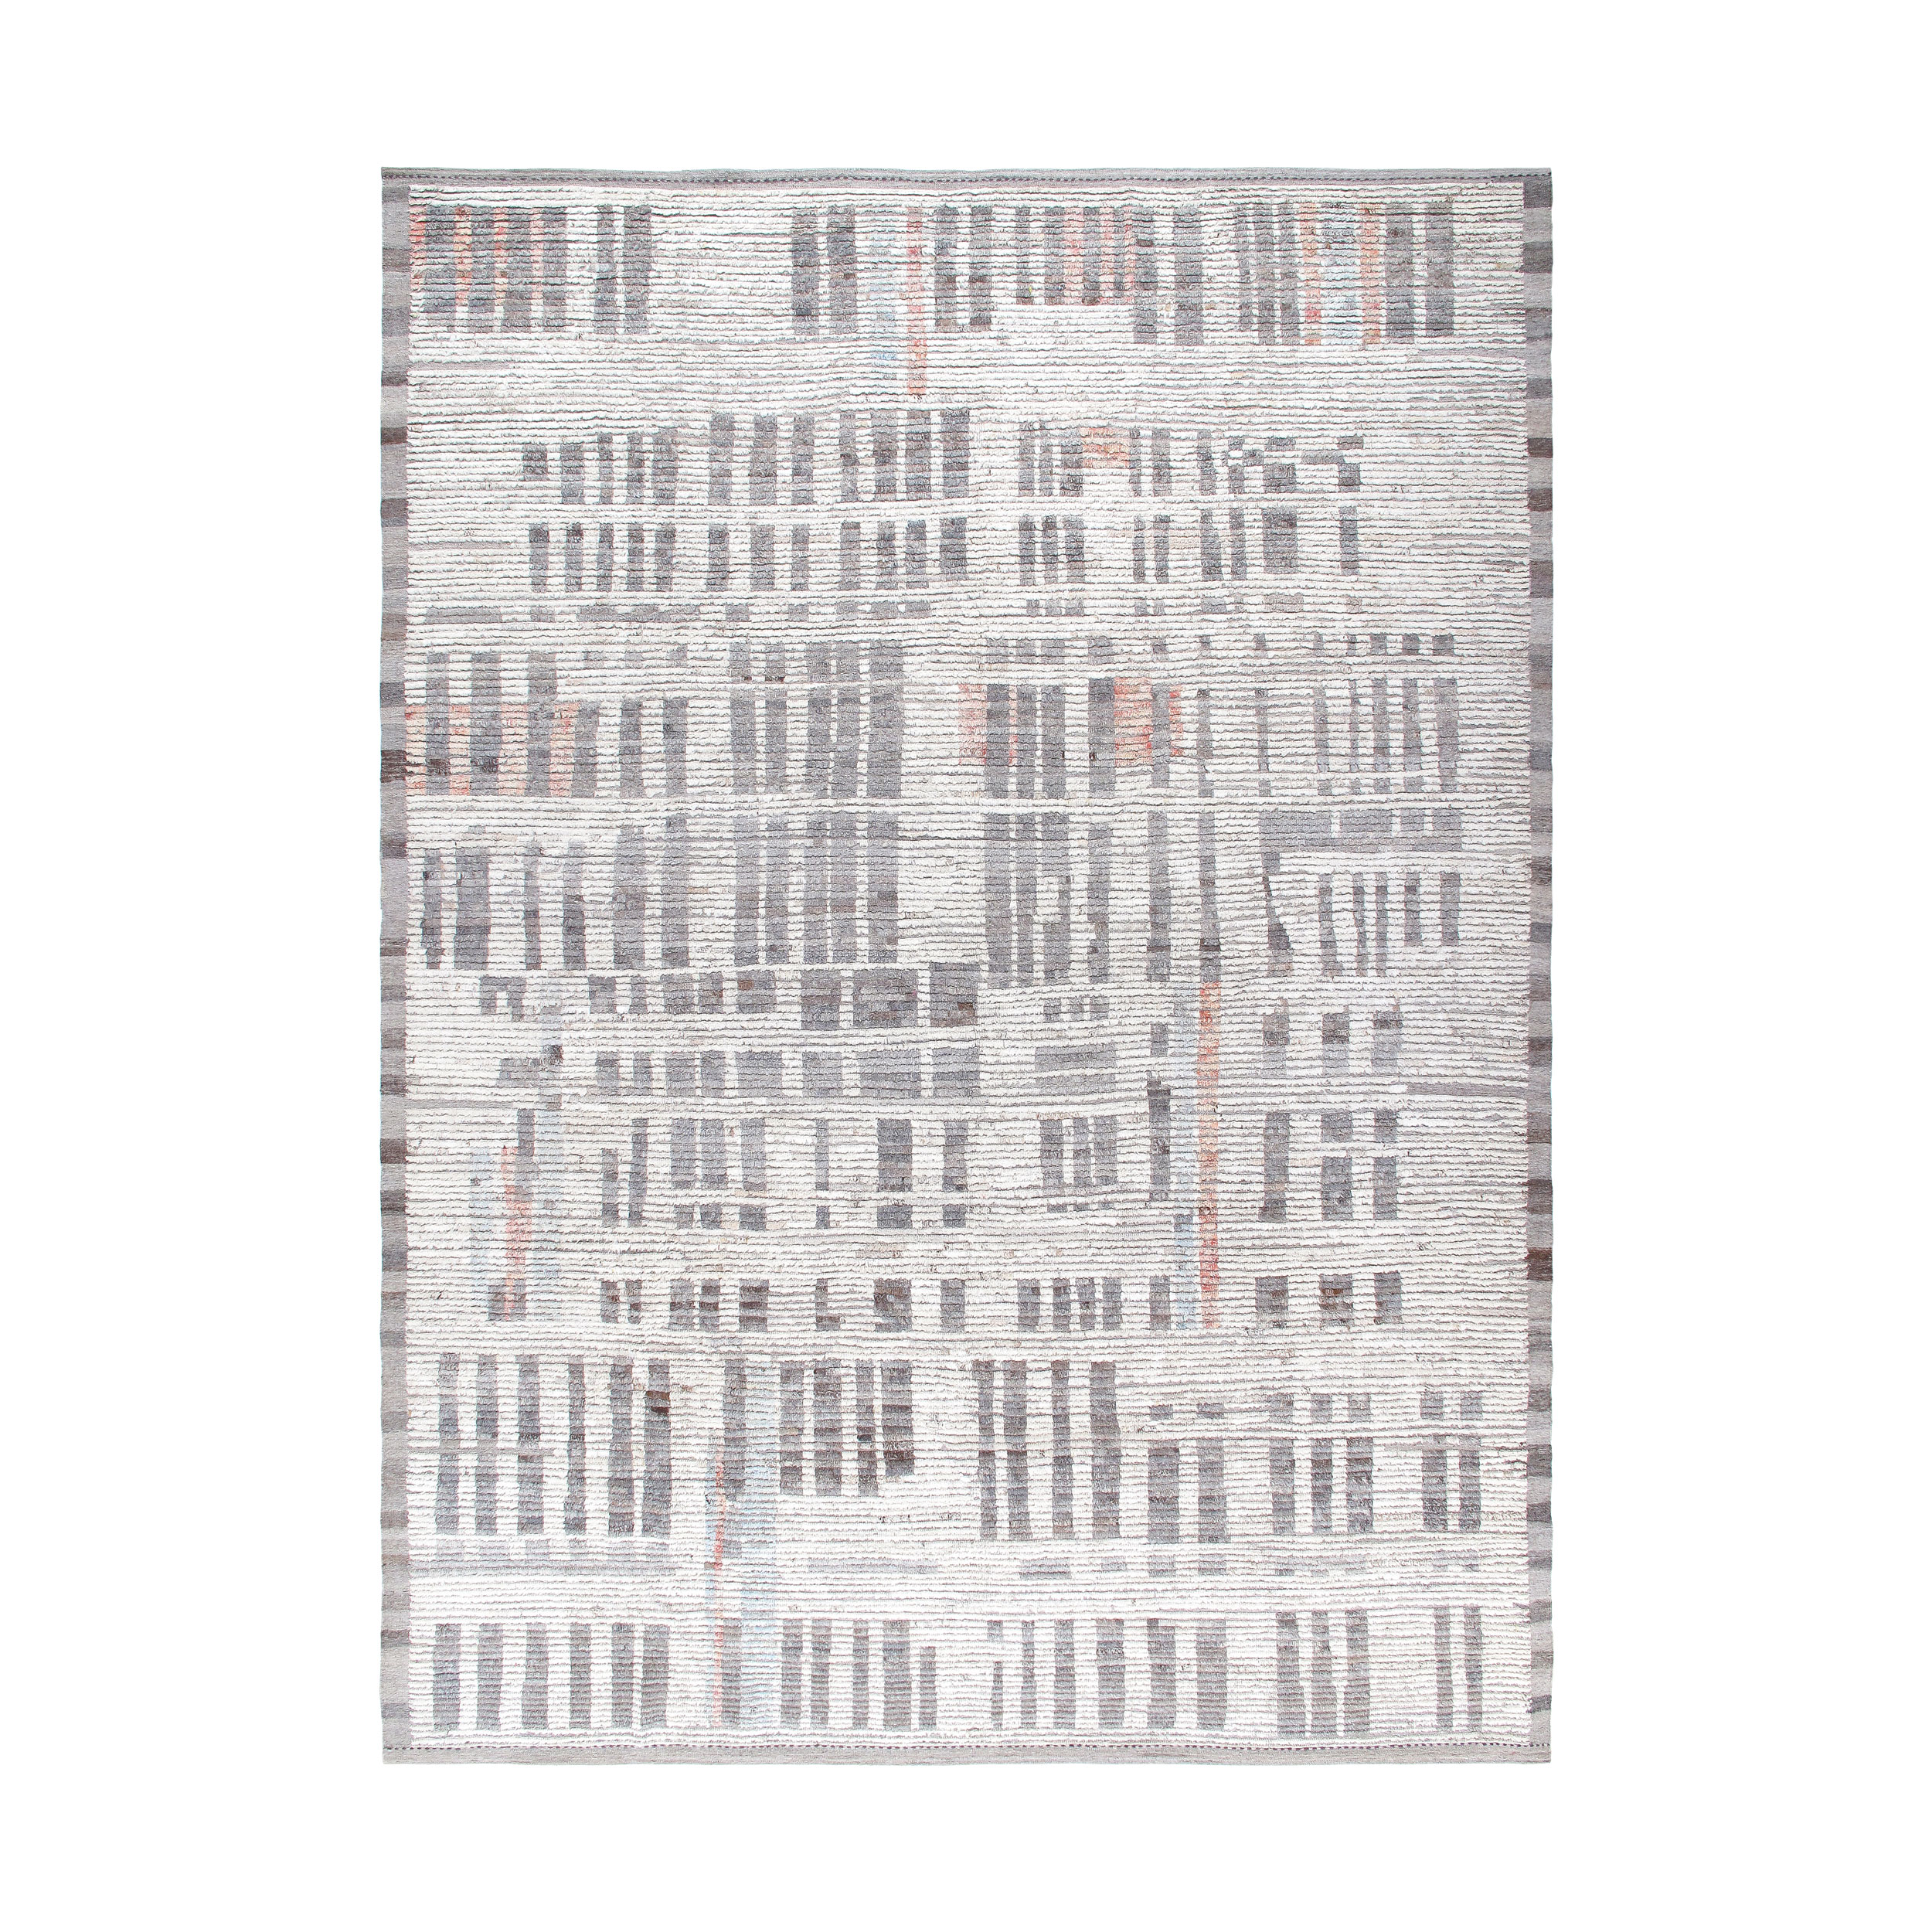 This Primrose rug is hand-knotted and made of 100% wool. 